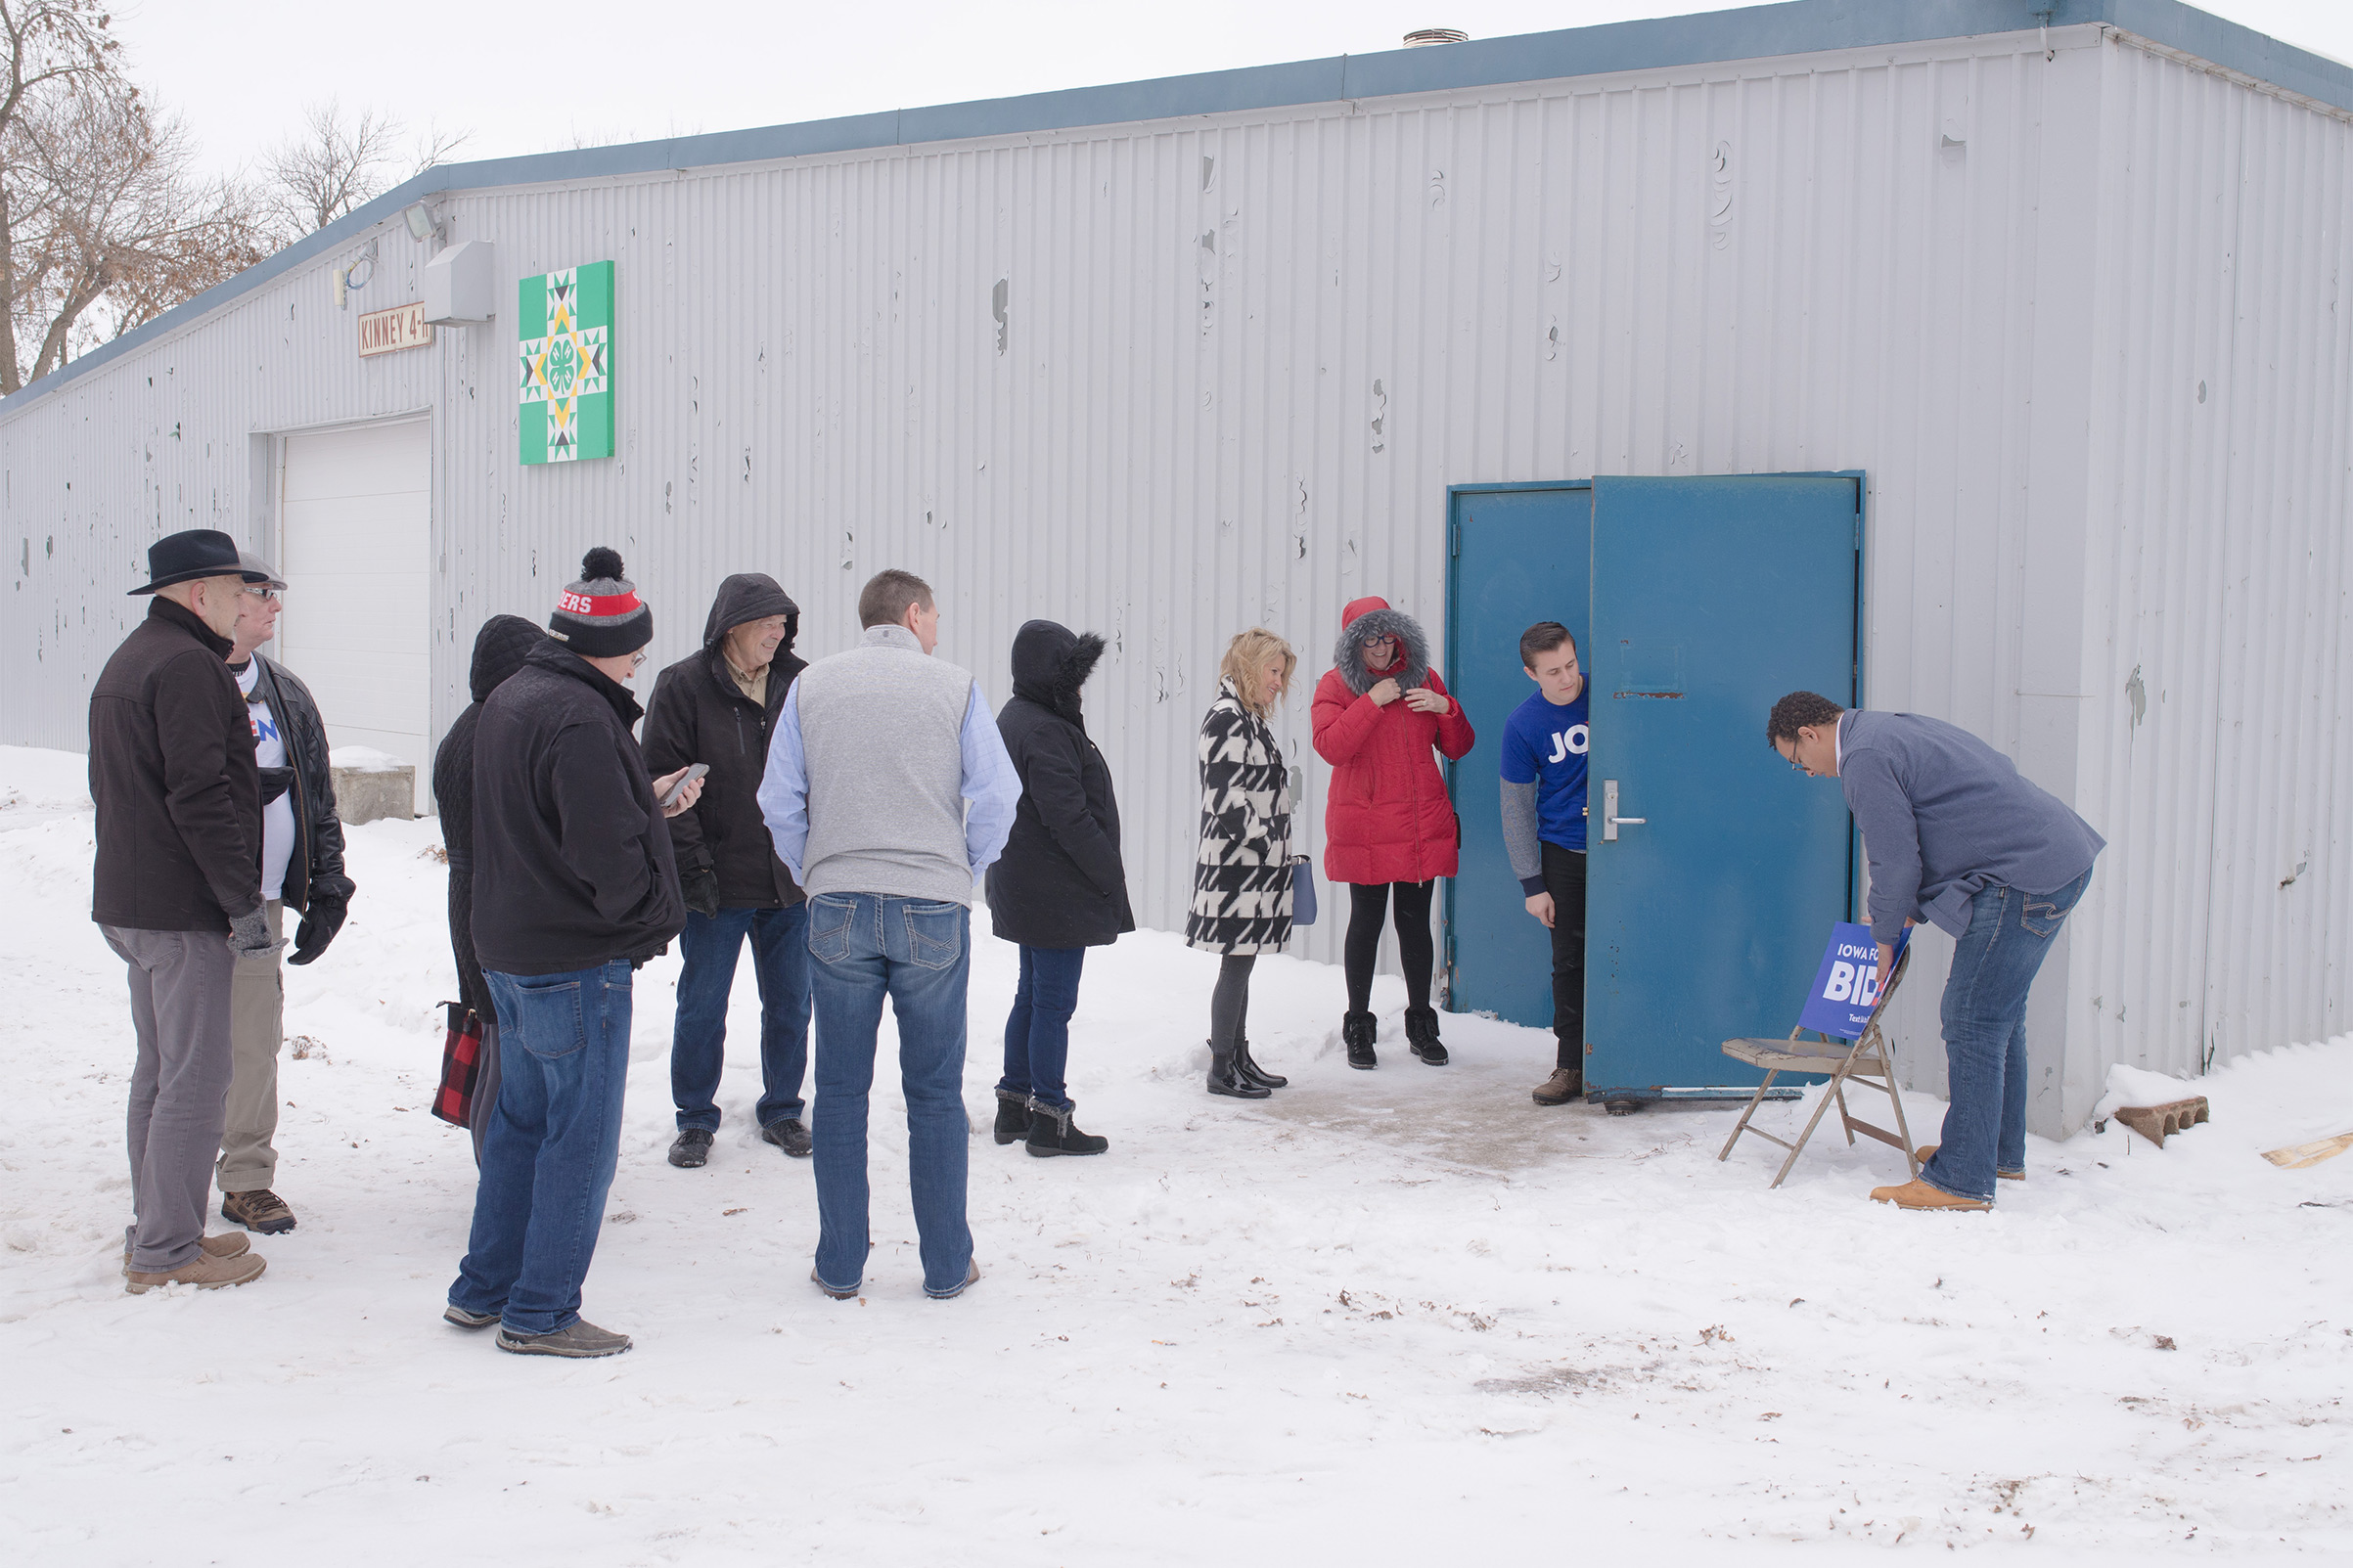 Supporters line up outside of a Joe Biden community event in Mason City, Iowa, Jan. 22, 2020. (September Dawn Bottoms for TIME)